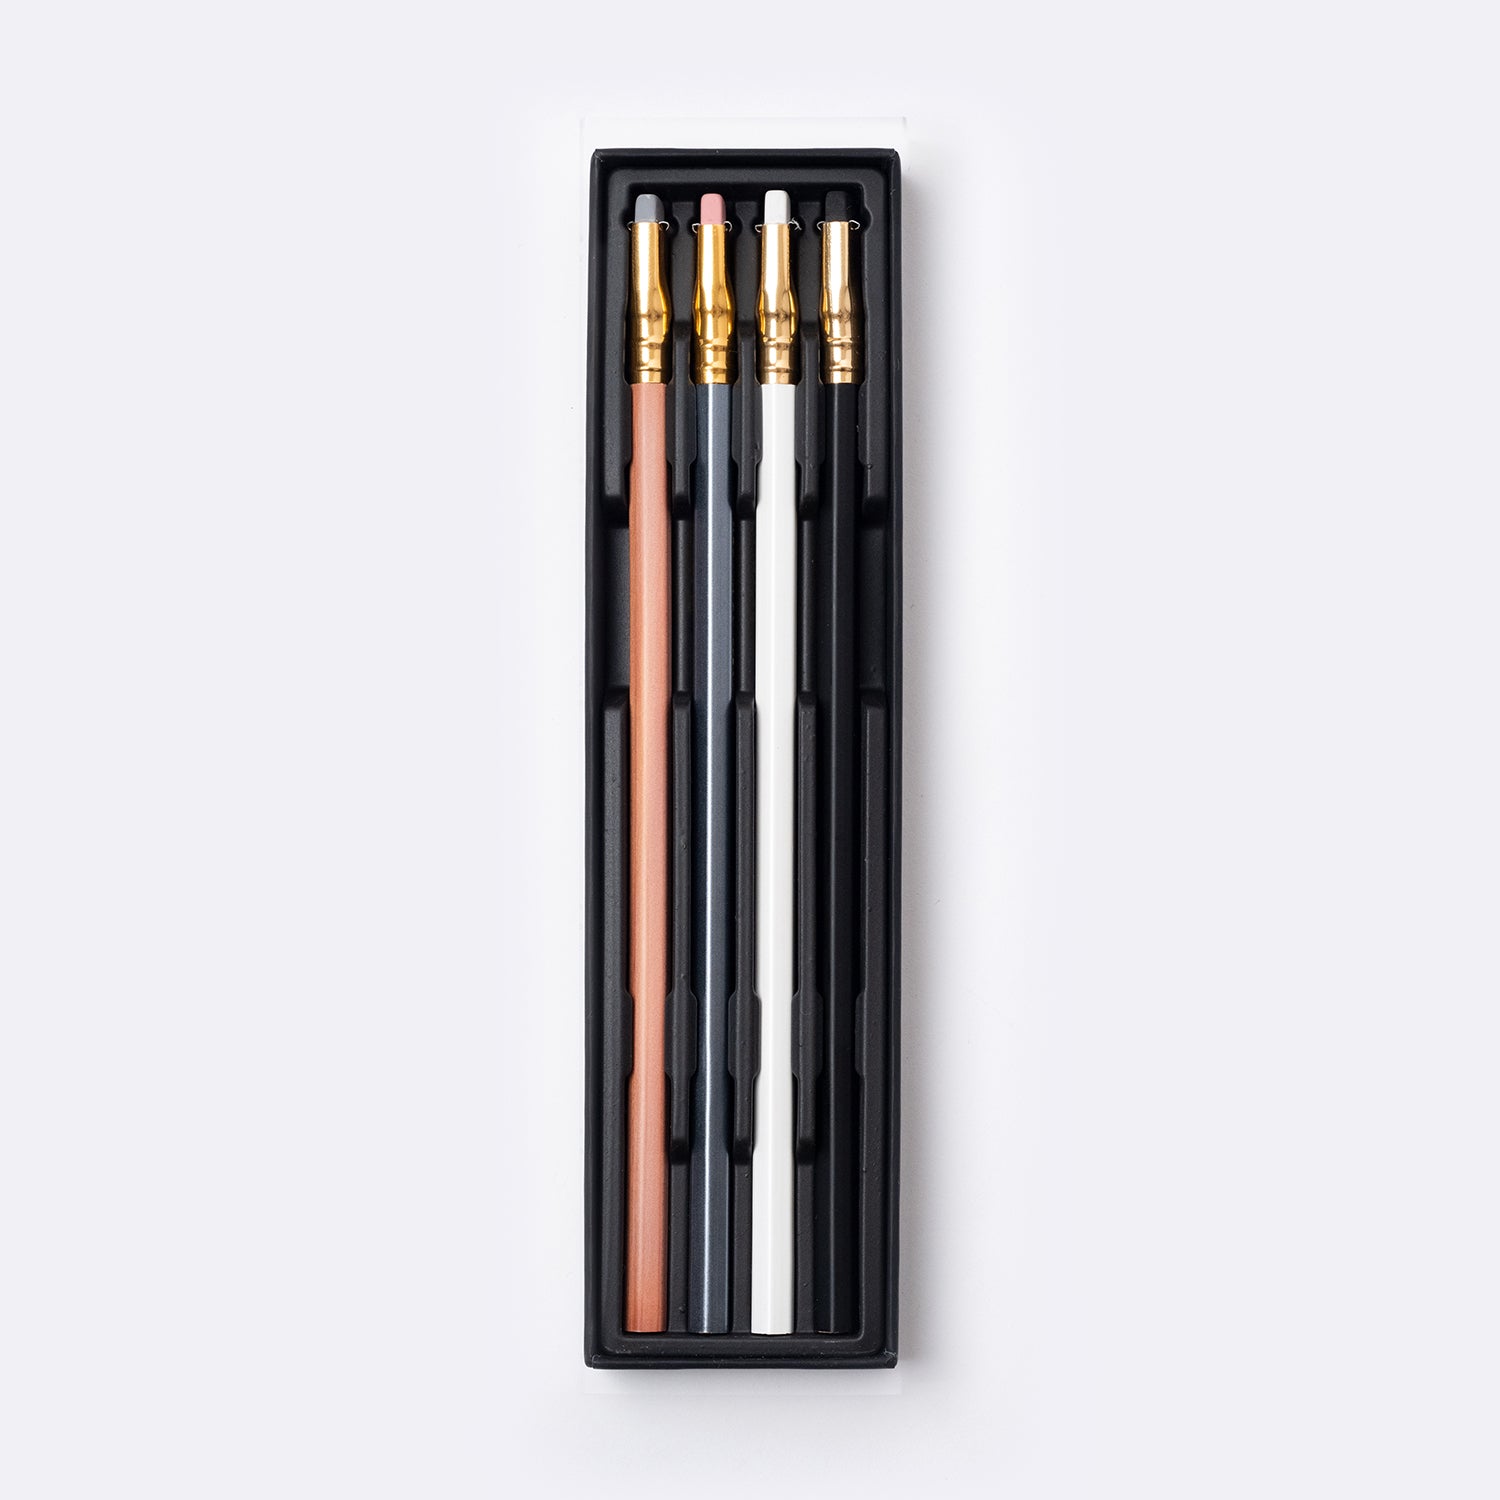 Blackwing Volume 7- Balanced Graphite - The Animation Pencil — Two